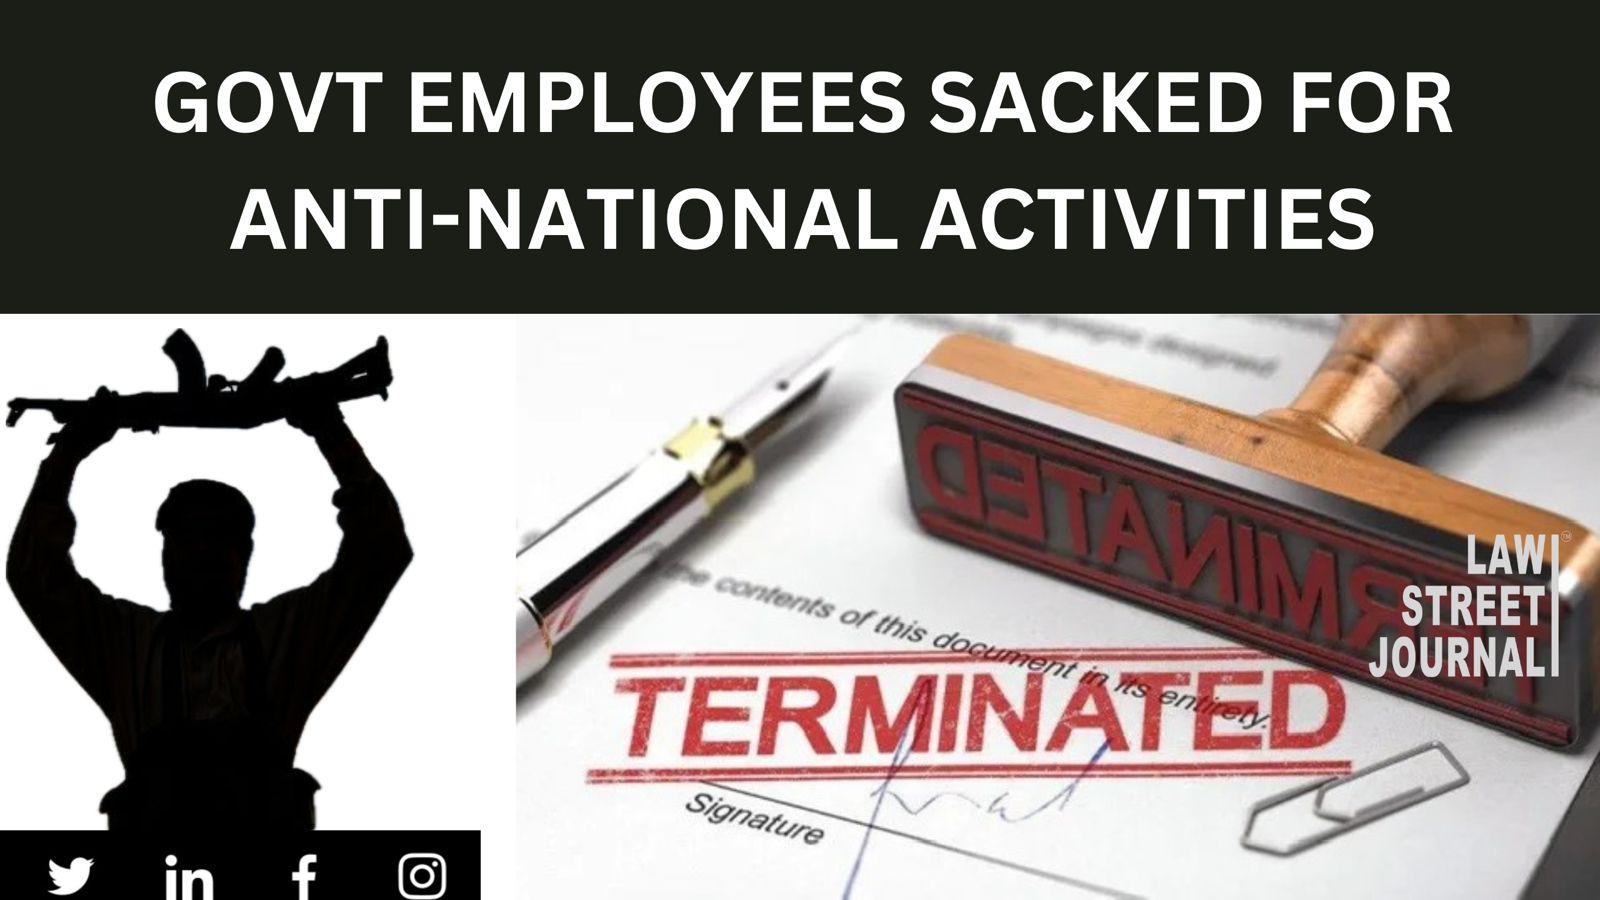 Over 50 govt employees sacked for anti-national and terror activities in last 3 years 